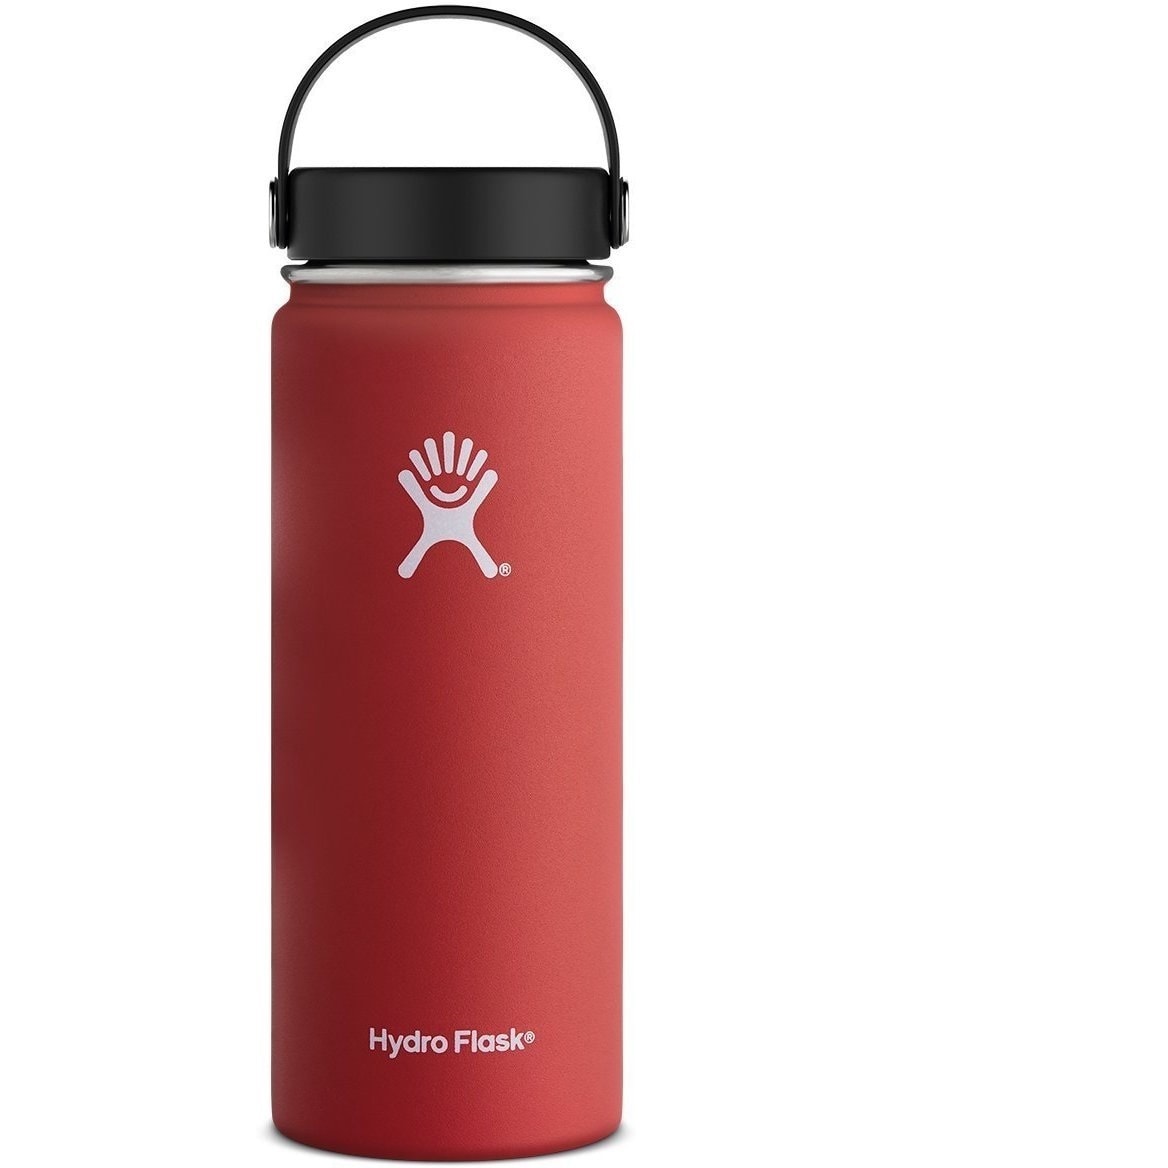 Hydro Flask 21 oz Water Bottle Stainless Steel, Vacuum Insulated